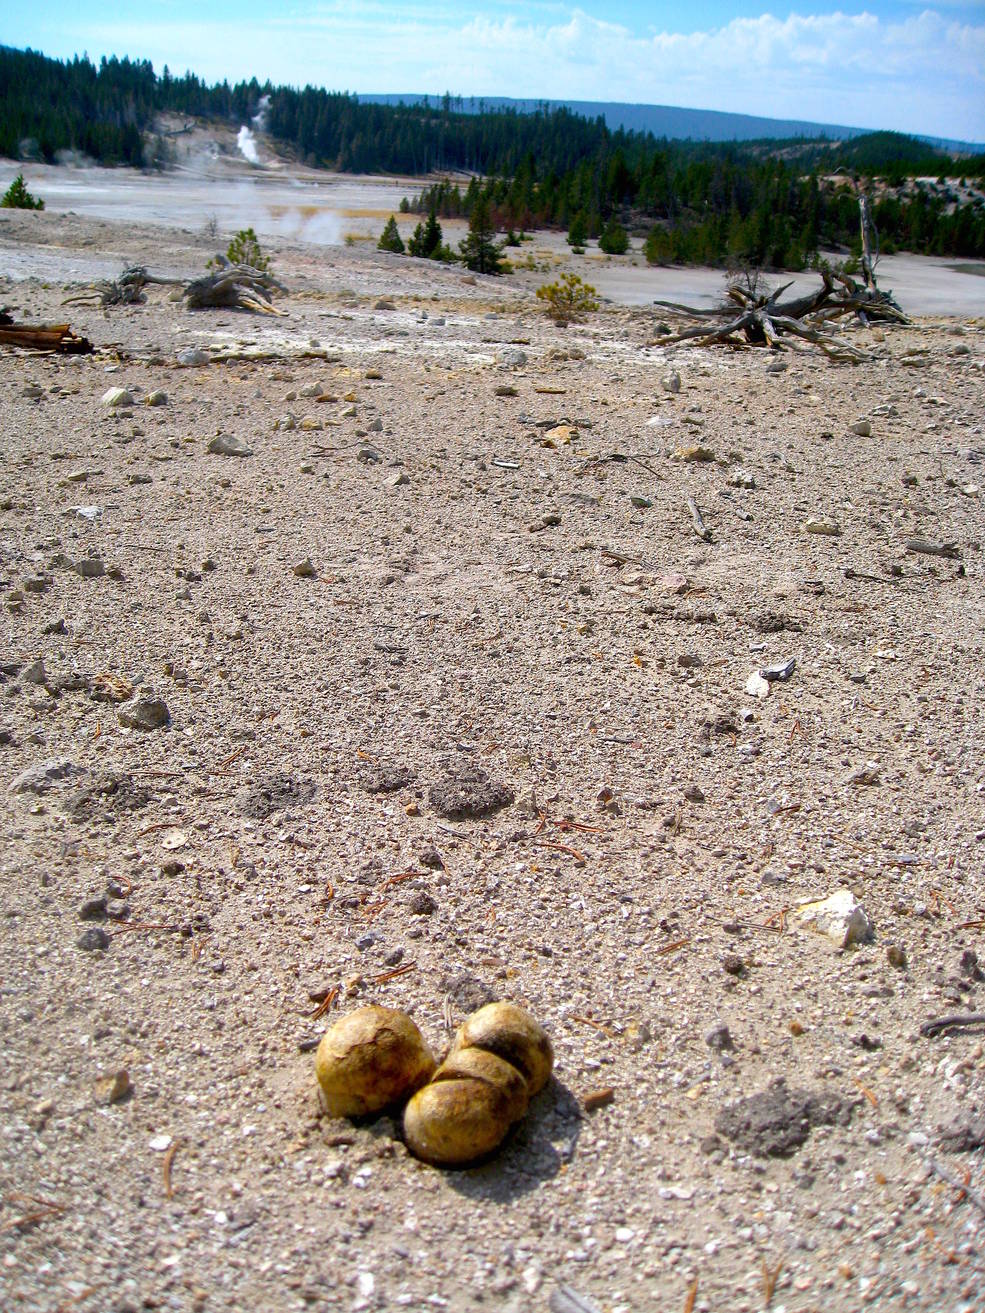 Three green and yellow tinted bulbs in a barren landscape, with steam rising in the distance.